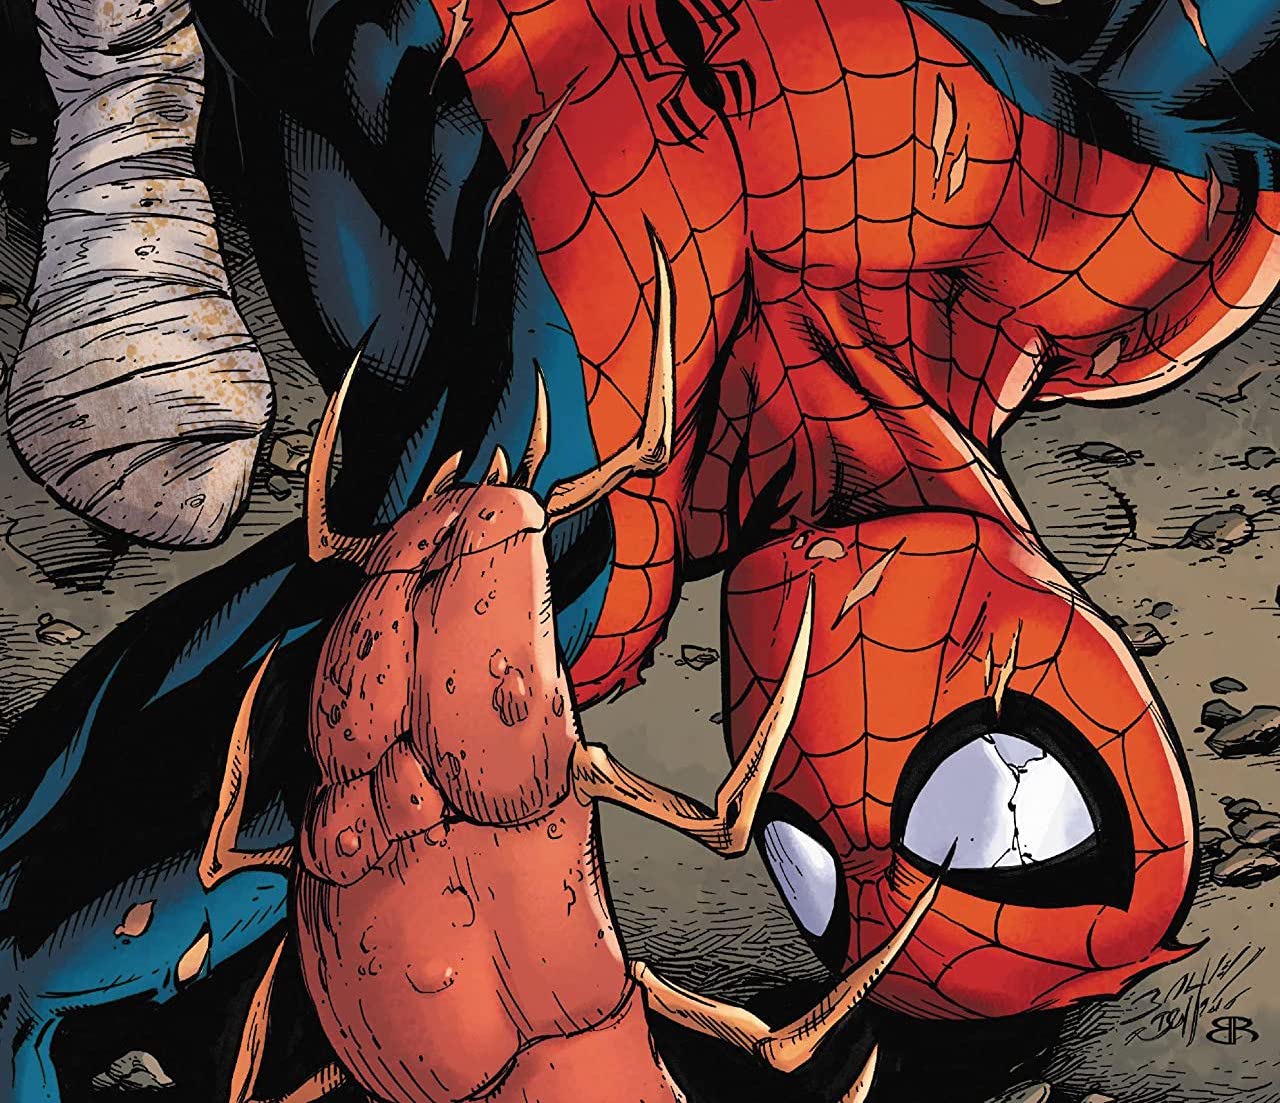 'Amazing Spider-Man' #72 adds a new wrinkle to 'One More Day'